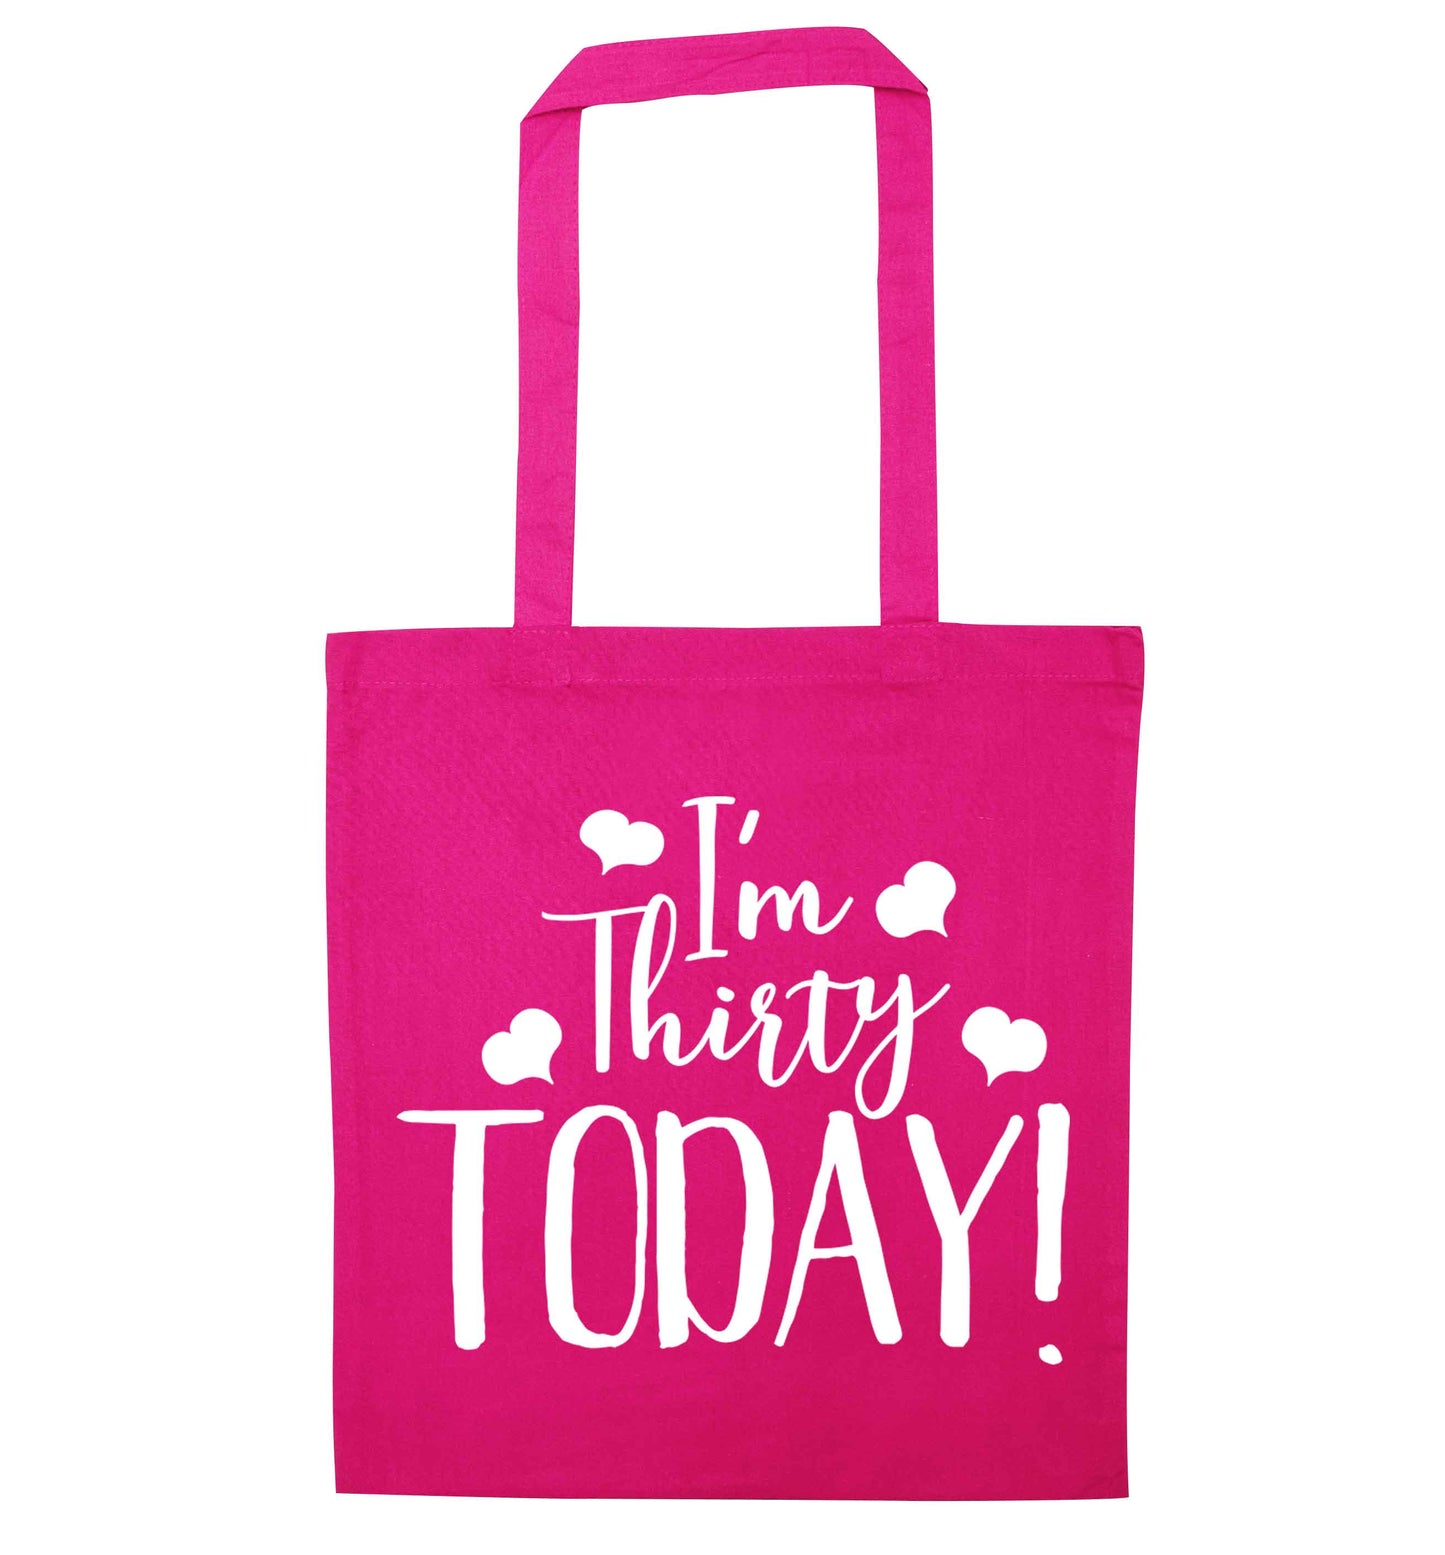 I'm thirty today! pink tote bag